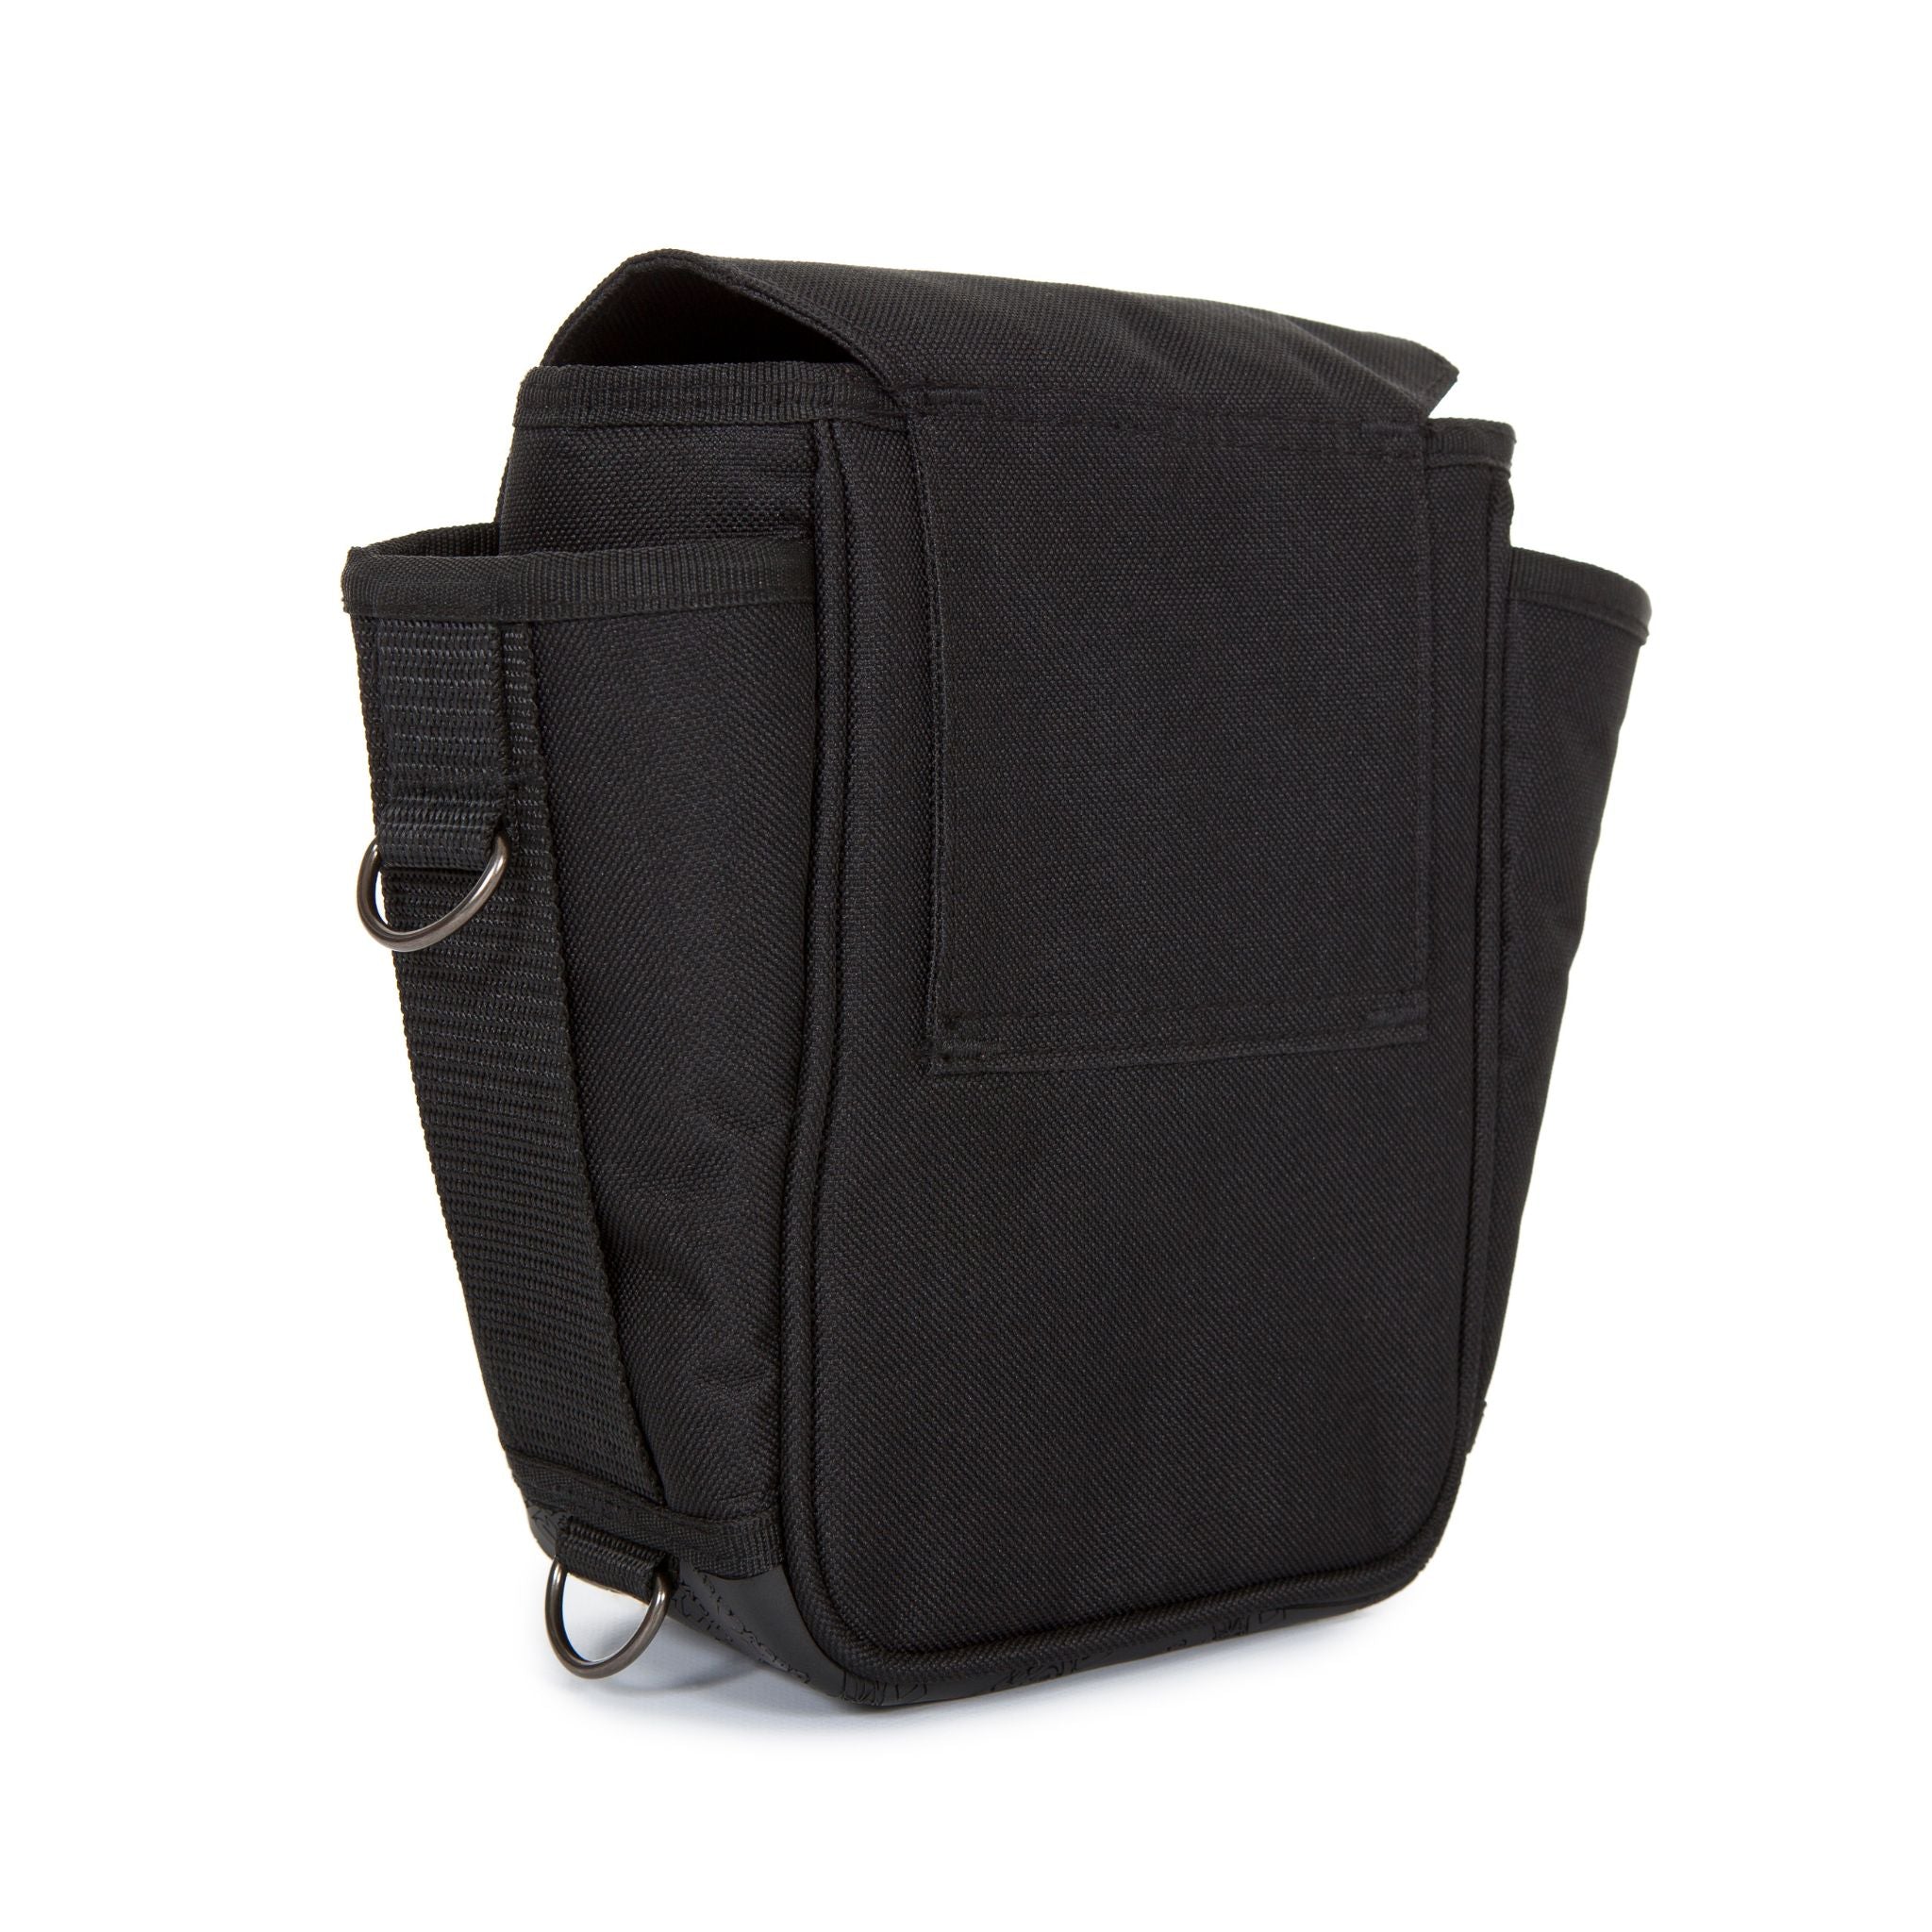 Tech pouch with belt attachment and tool pockets and d-rings